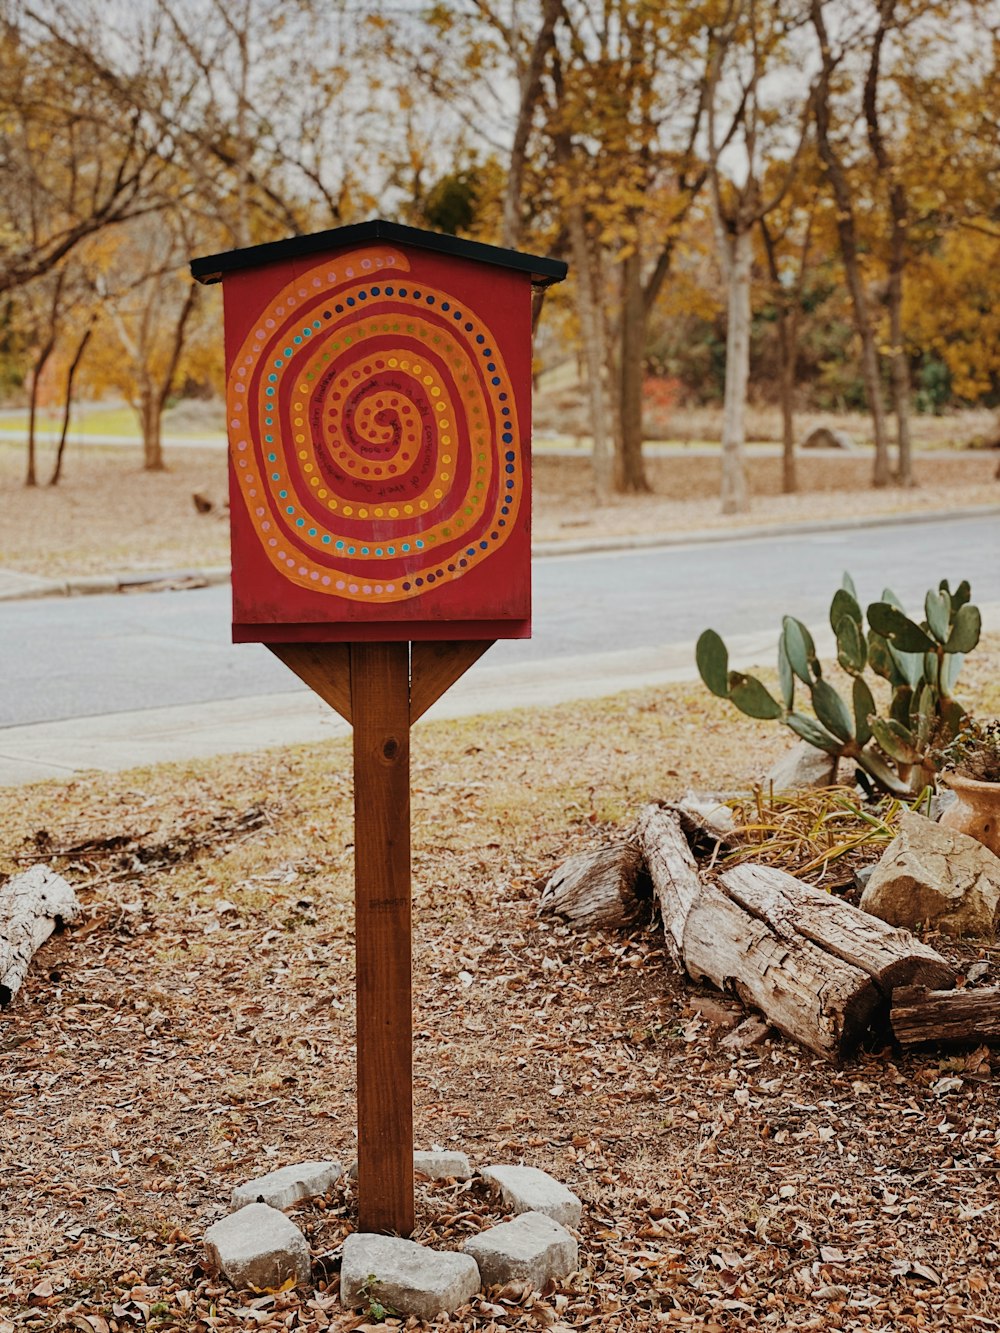 a red box with a spiral design on it